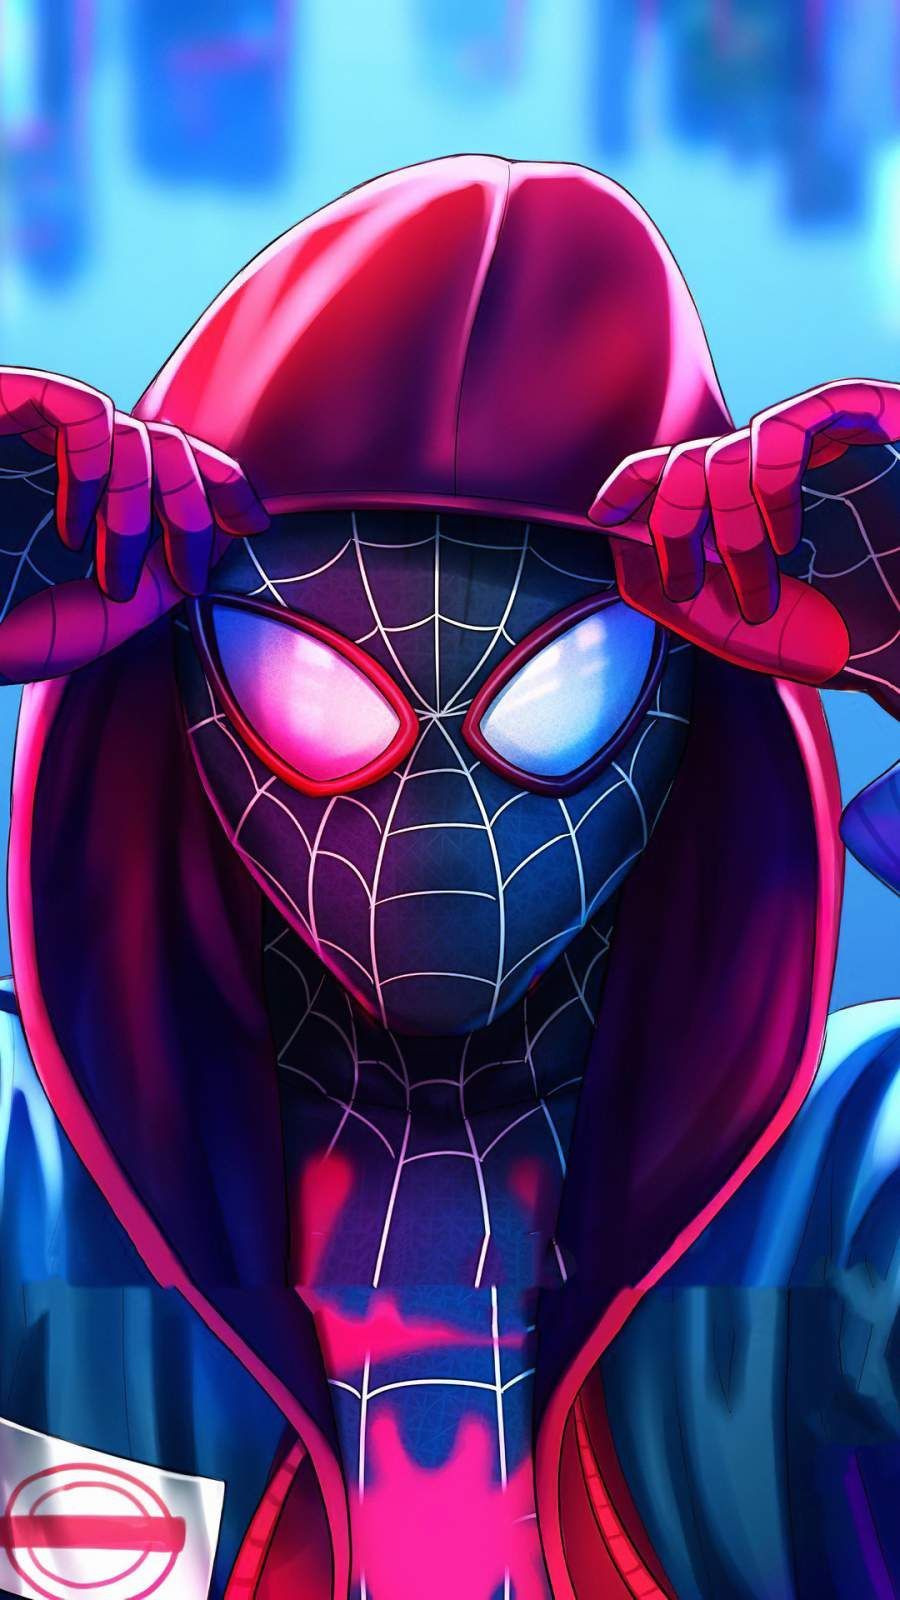 Download Miles Spiderman Hoodie Mobile Wallpaper For Your Android, IPhone Wallpaper Or IPad Tablet Wa In 2020. Spiderman Artwork, Spiderman Art, Marvel Superhero Posters